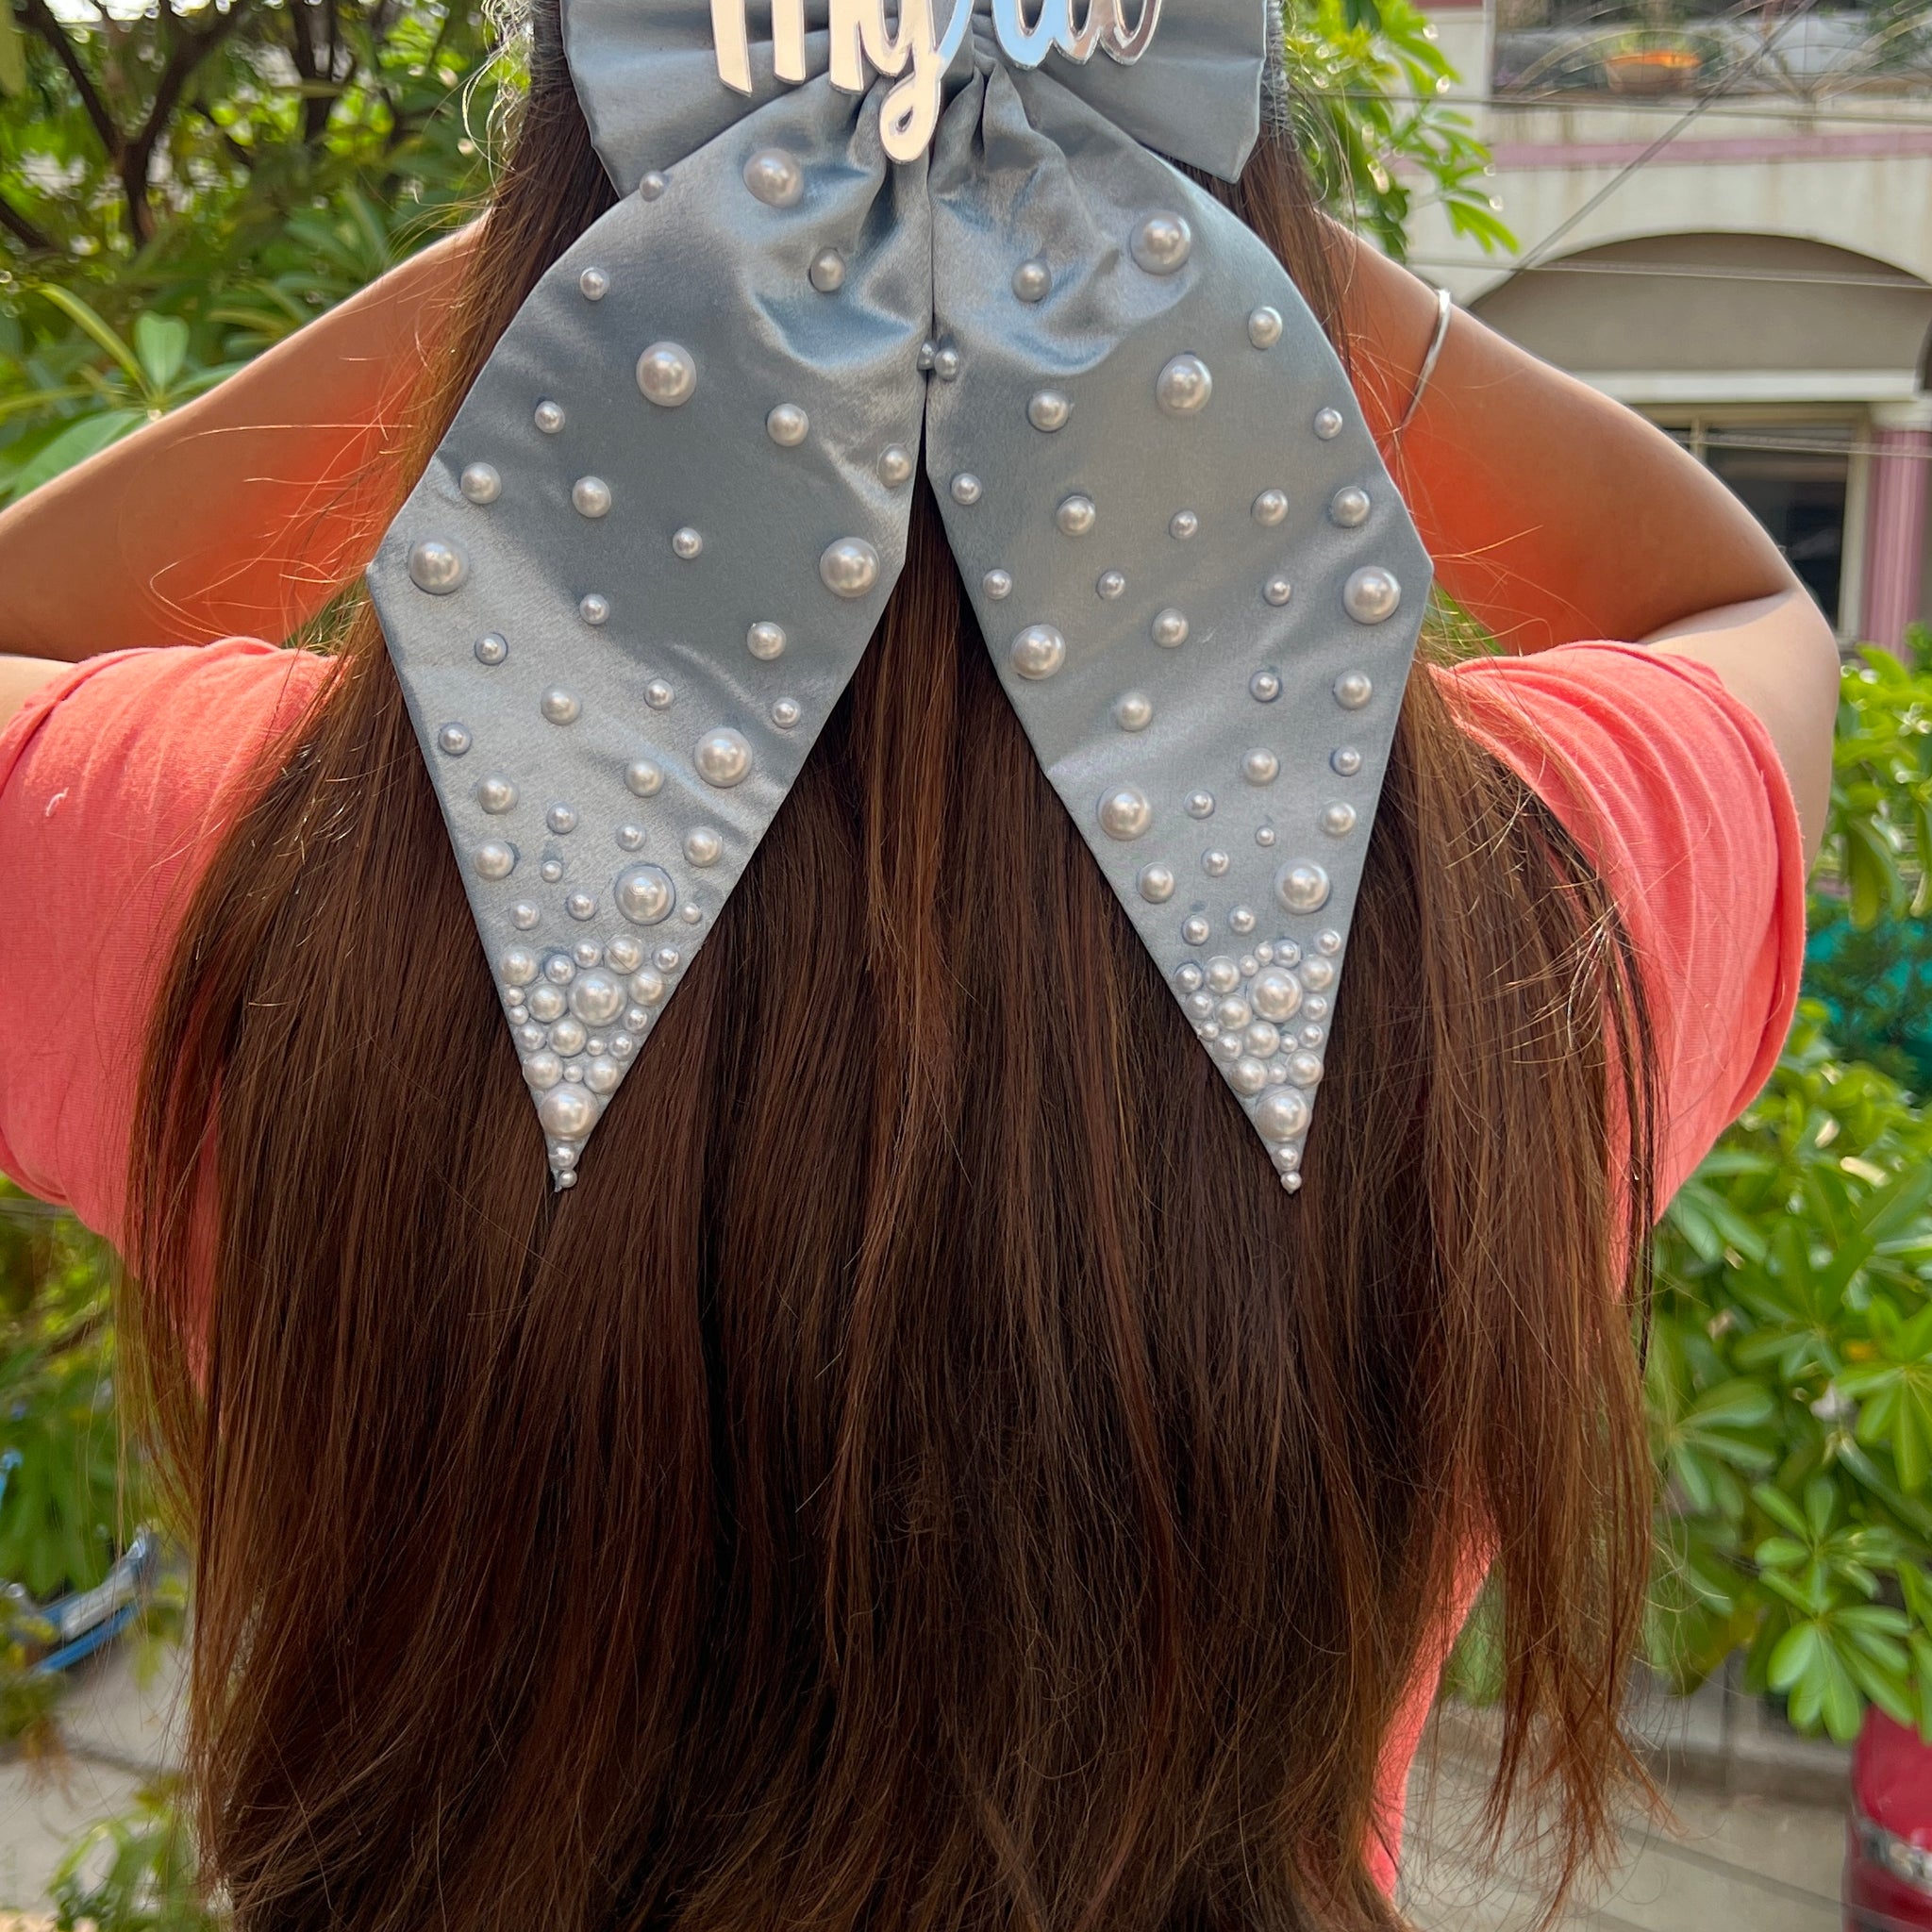 Customise name  bigtail pearl bow